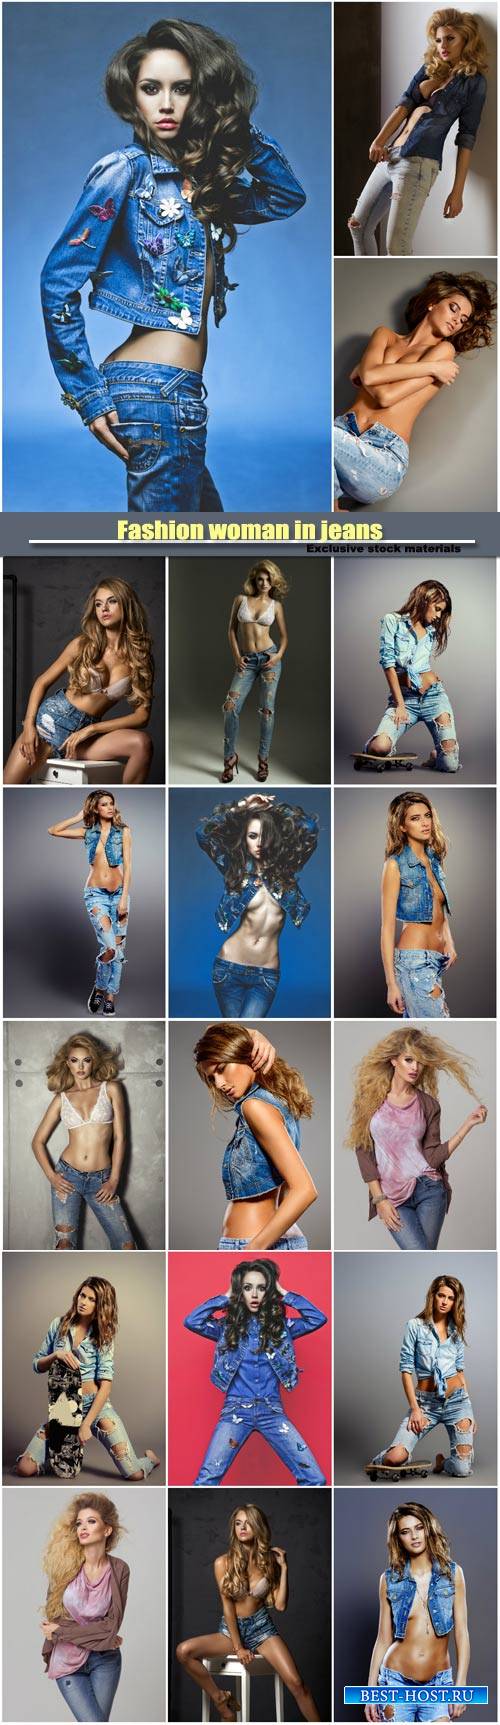 Fashion woman in jeans